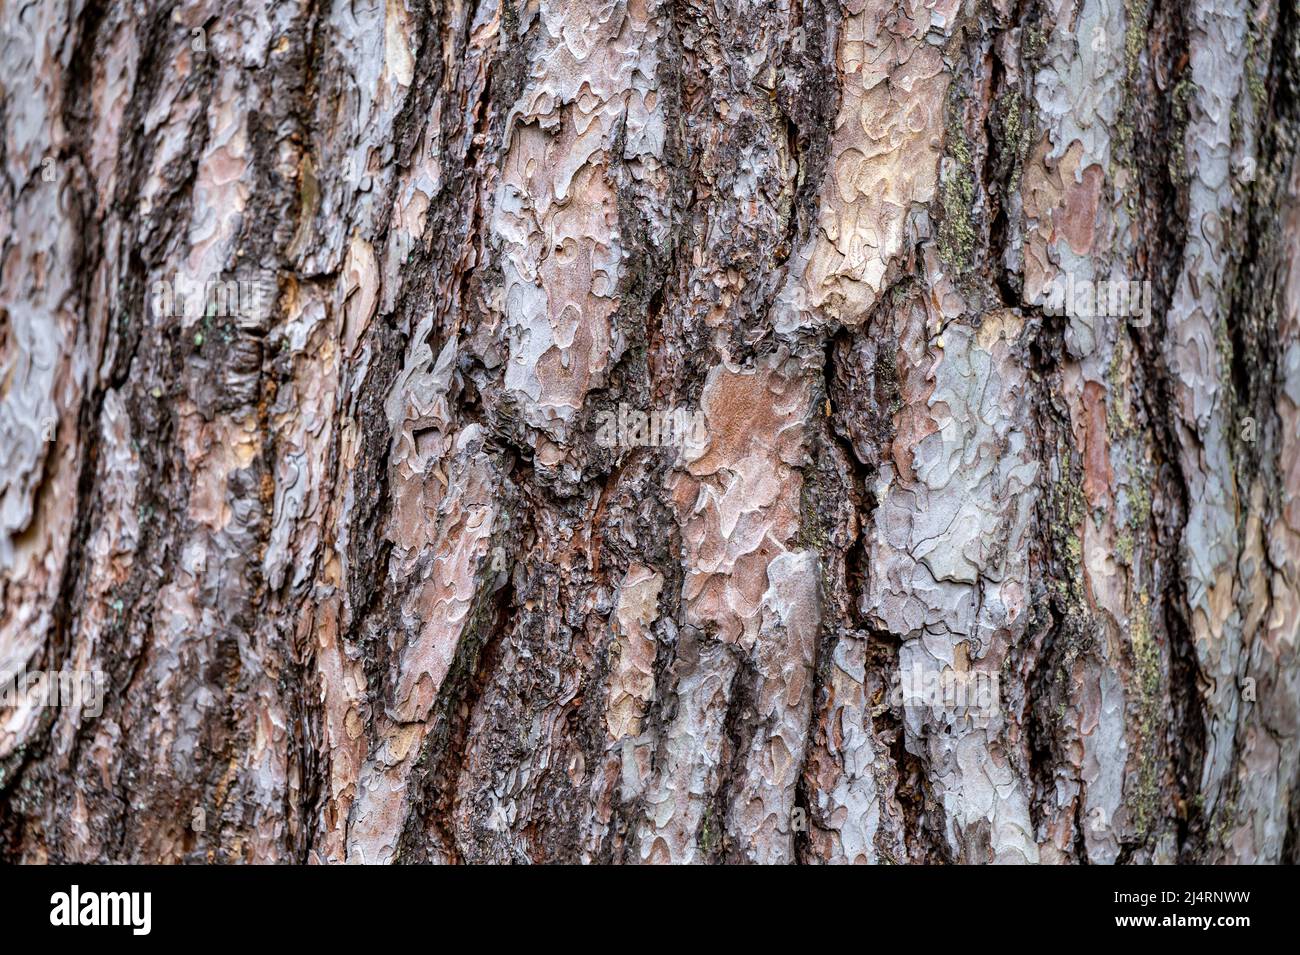 Background from old wood bark. Pinus sylvestris, Scotch pine, Baltic pine, Scots pine. Stock Photo